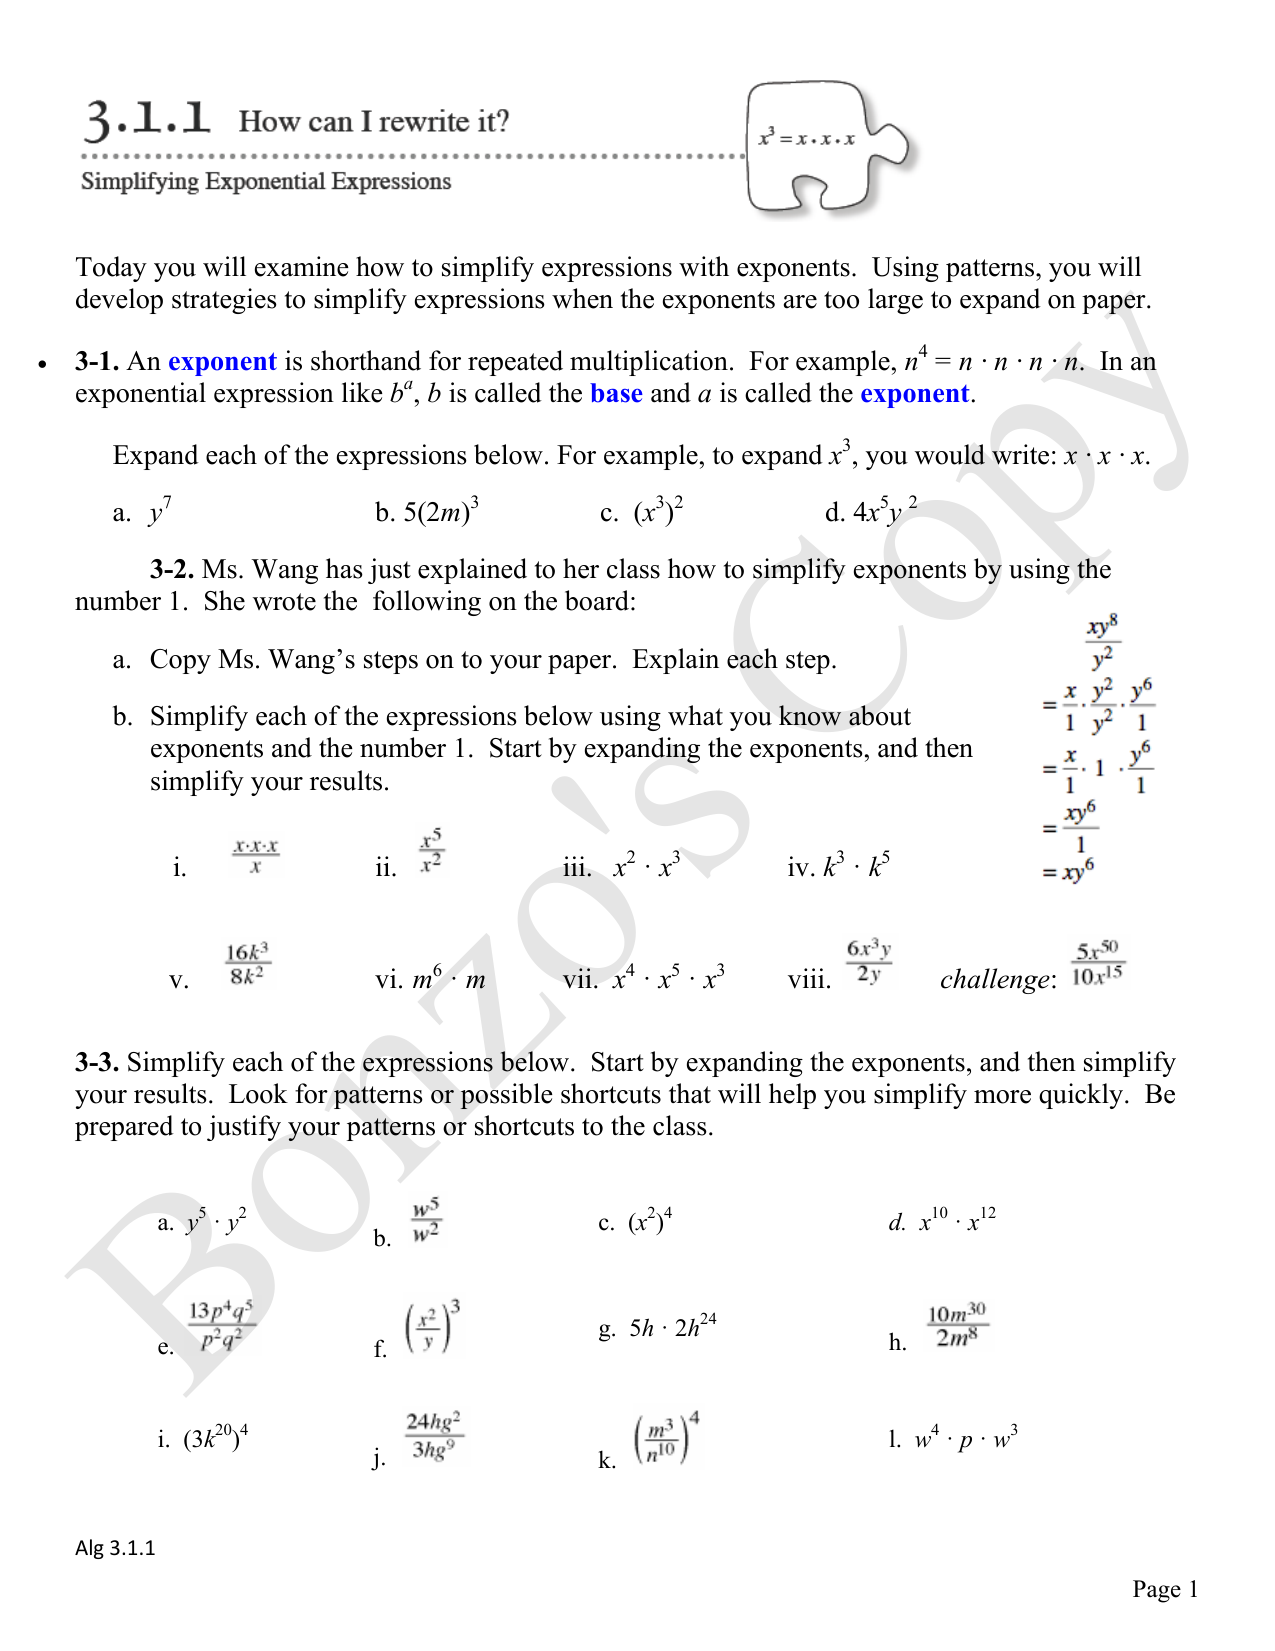 Today you will examine how to simplify expressions with exponents Inside Simplifying Exponential Expressions Worksheet